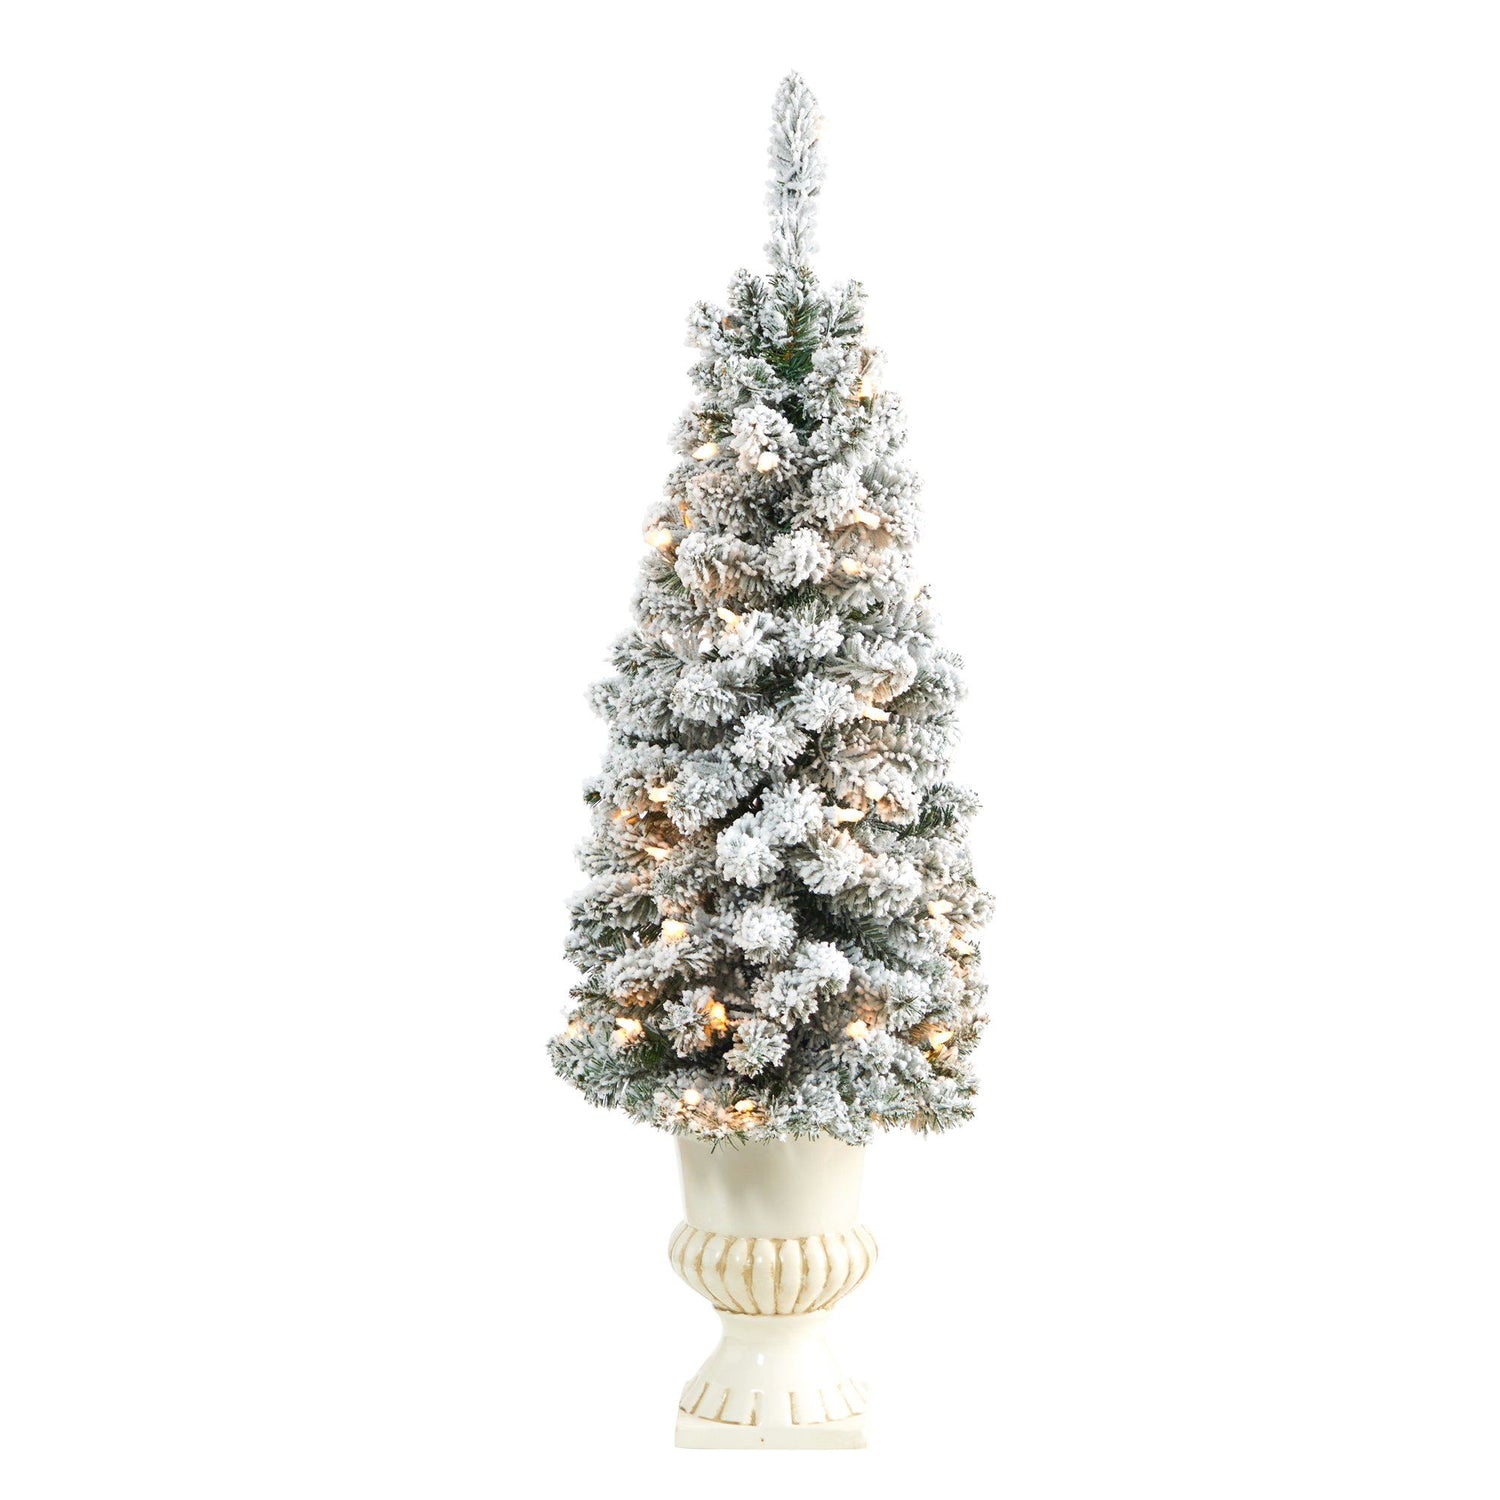 3’ Flocked Pencil Artificial Christmas Tree with 50 Clear Lights and 132 Bendable Branches in White Urn